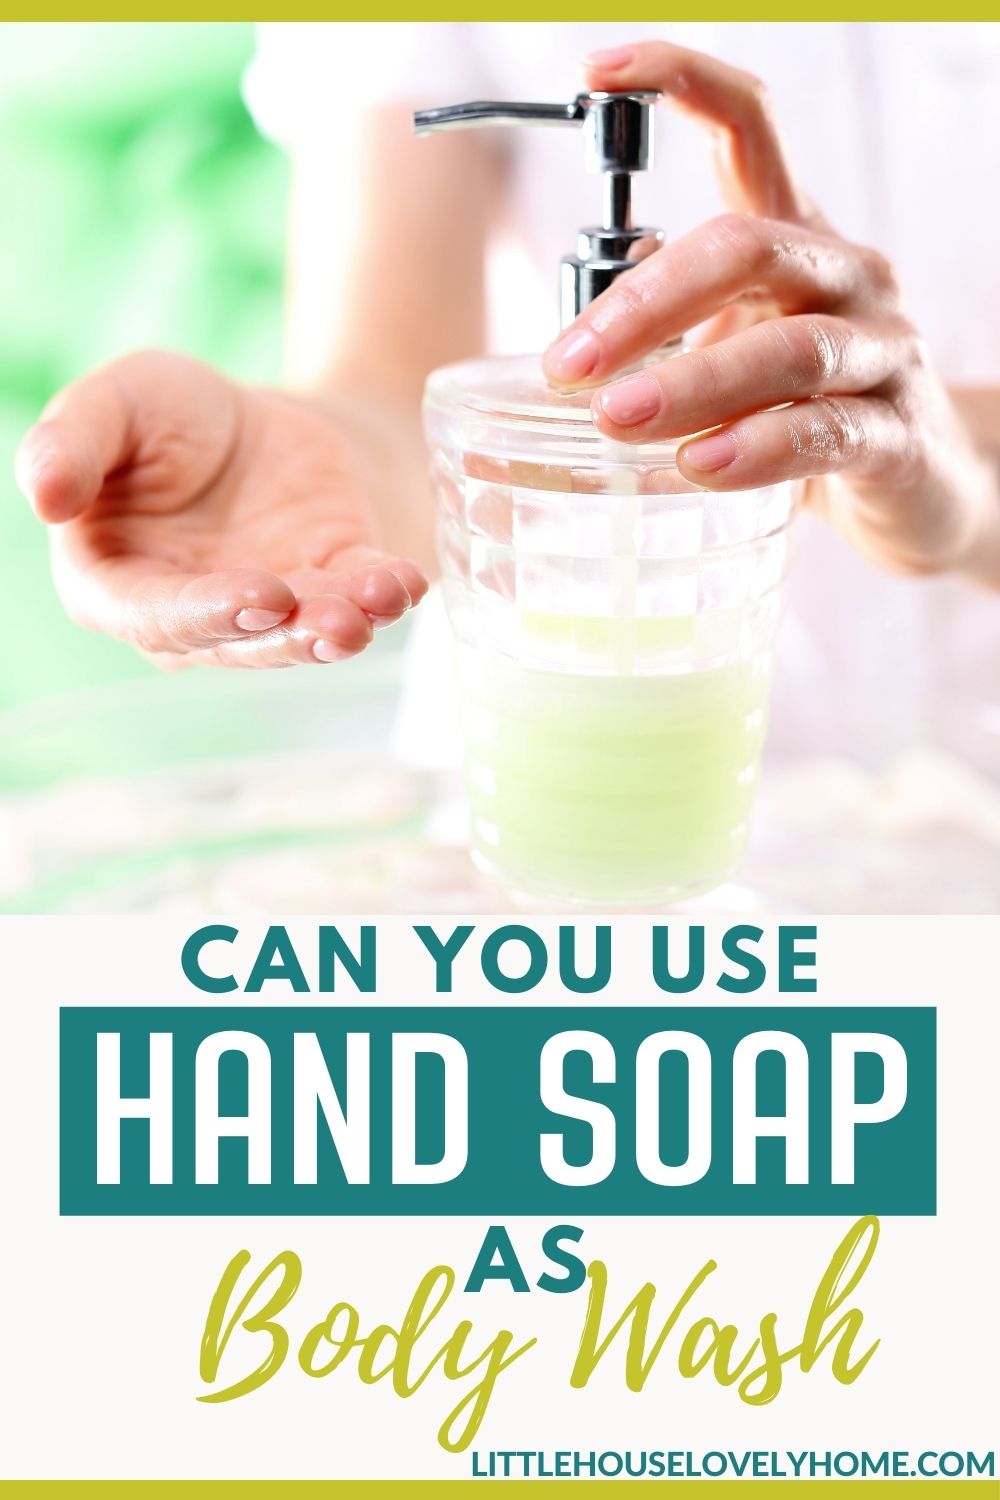 Image showing a pair of hand using a hand soap in a bottle with a text overlay that reads can you use hand soap as body wash